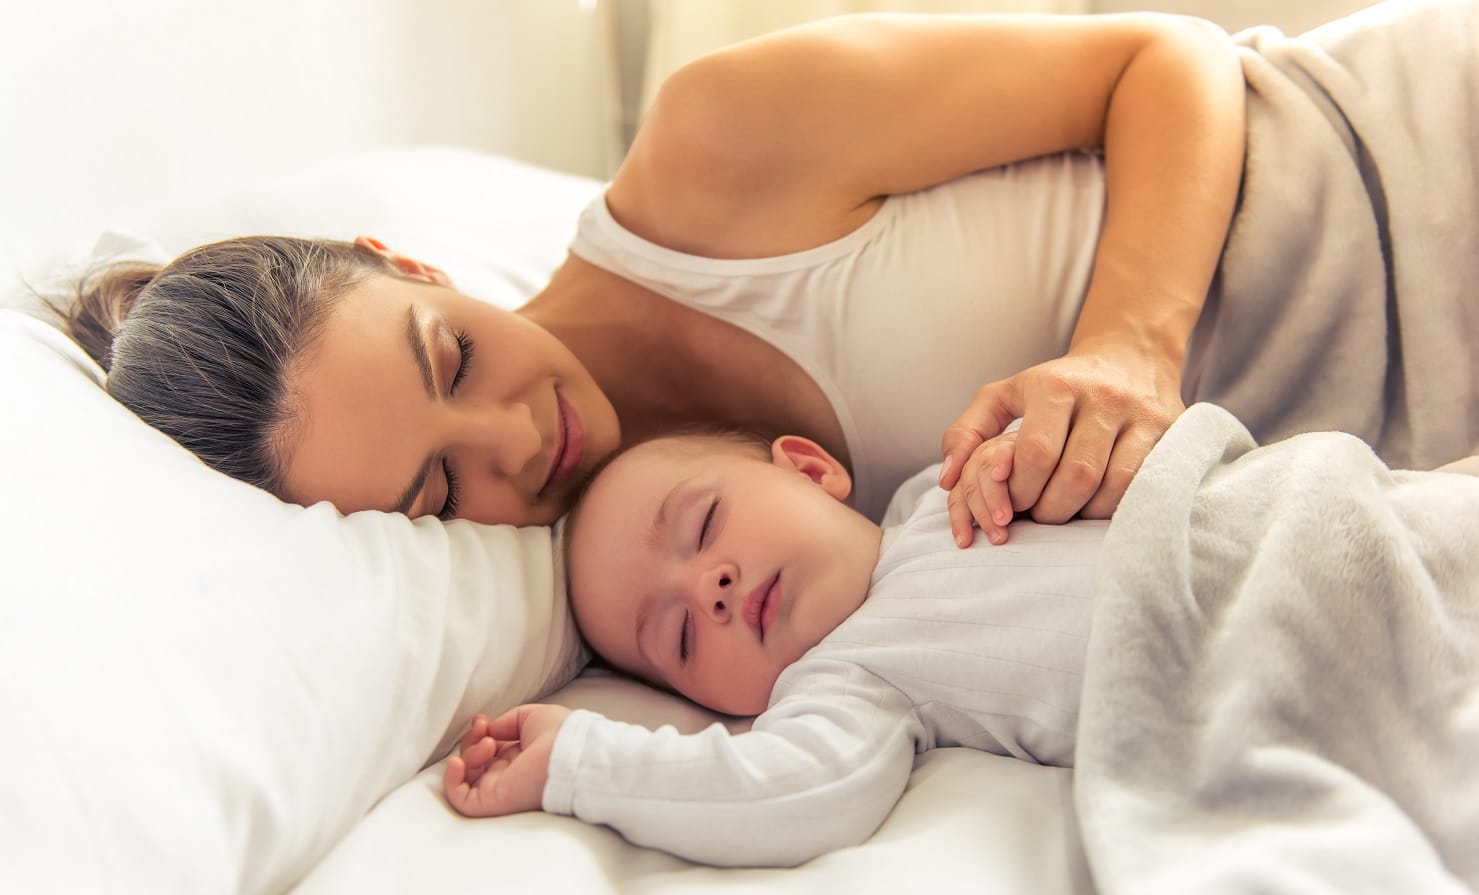 Precautions to Take when sleep with your New Born Baby - The Influence Of Parental Sleep Behavior On Children: How Co-Sleeping Shapes Sleep Patterns